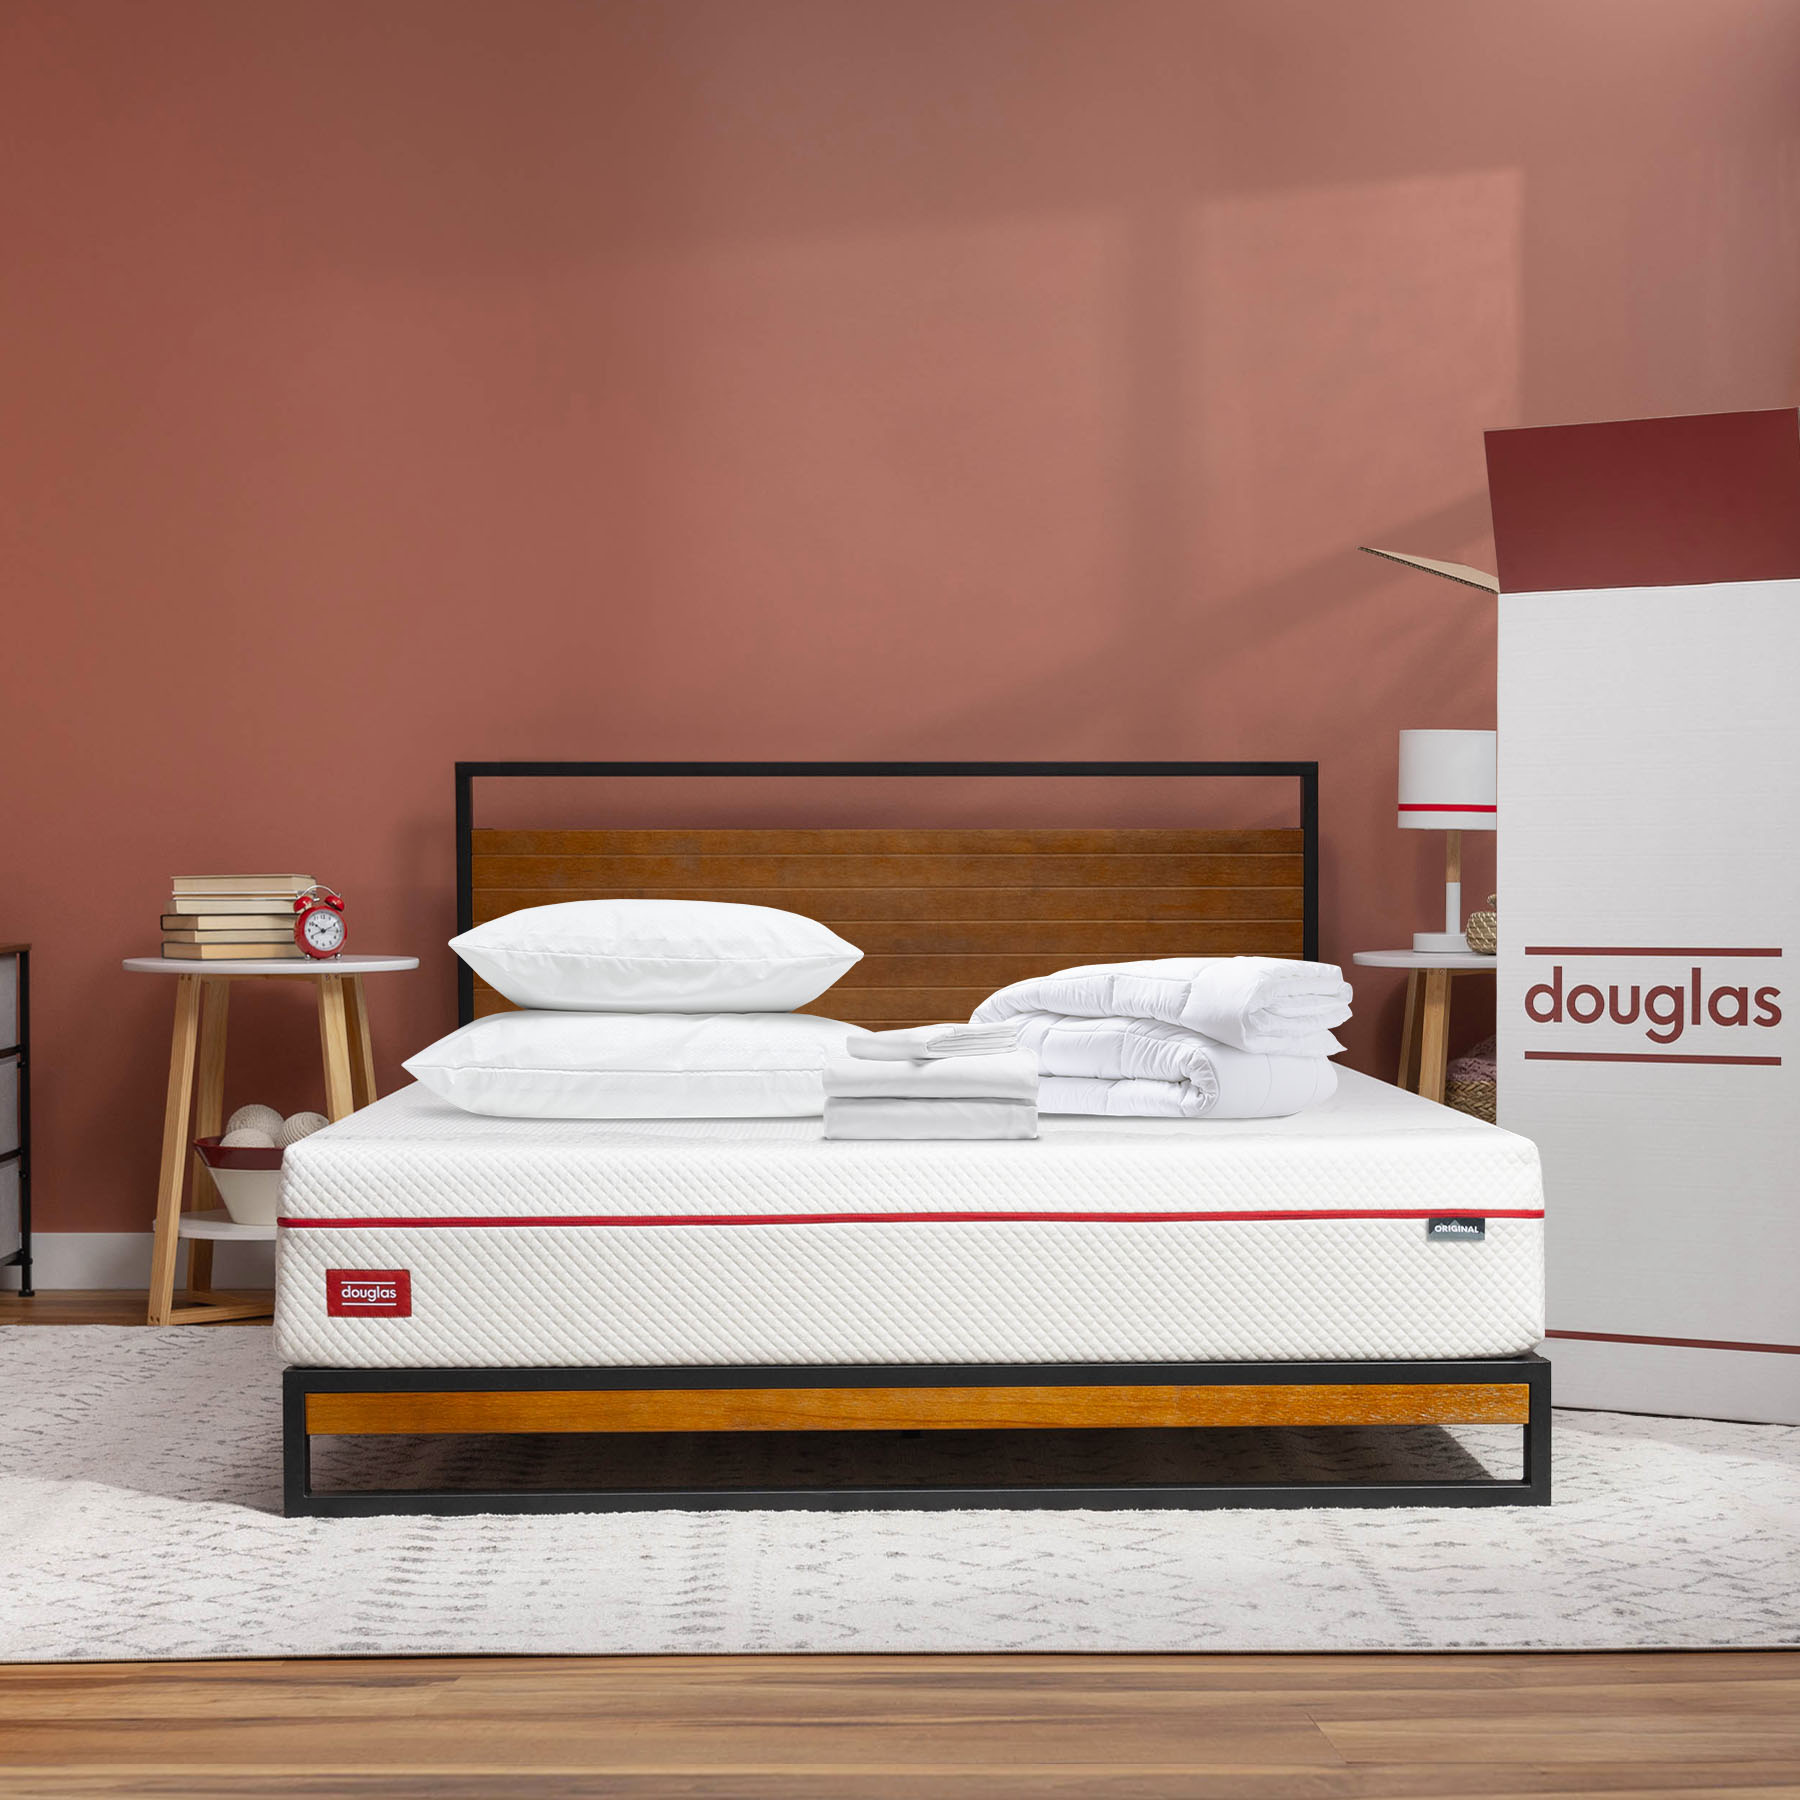 The History of the Twin XL Mattress